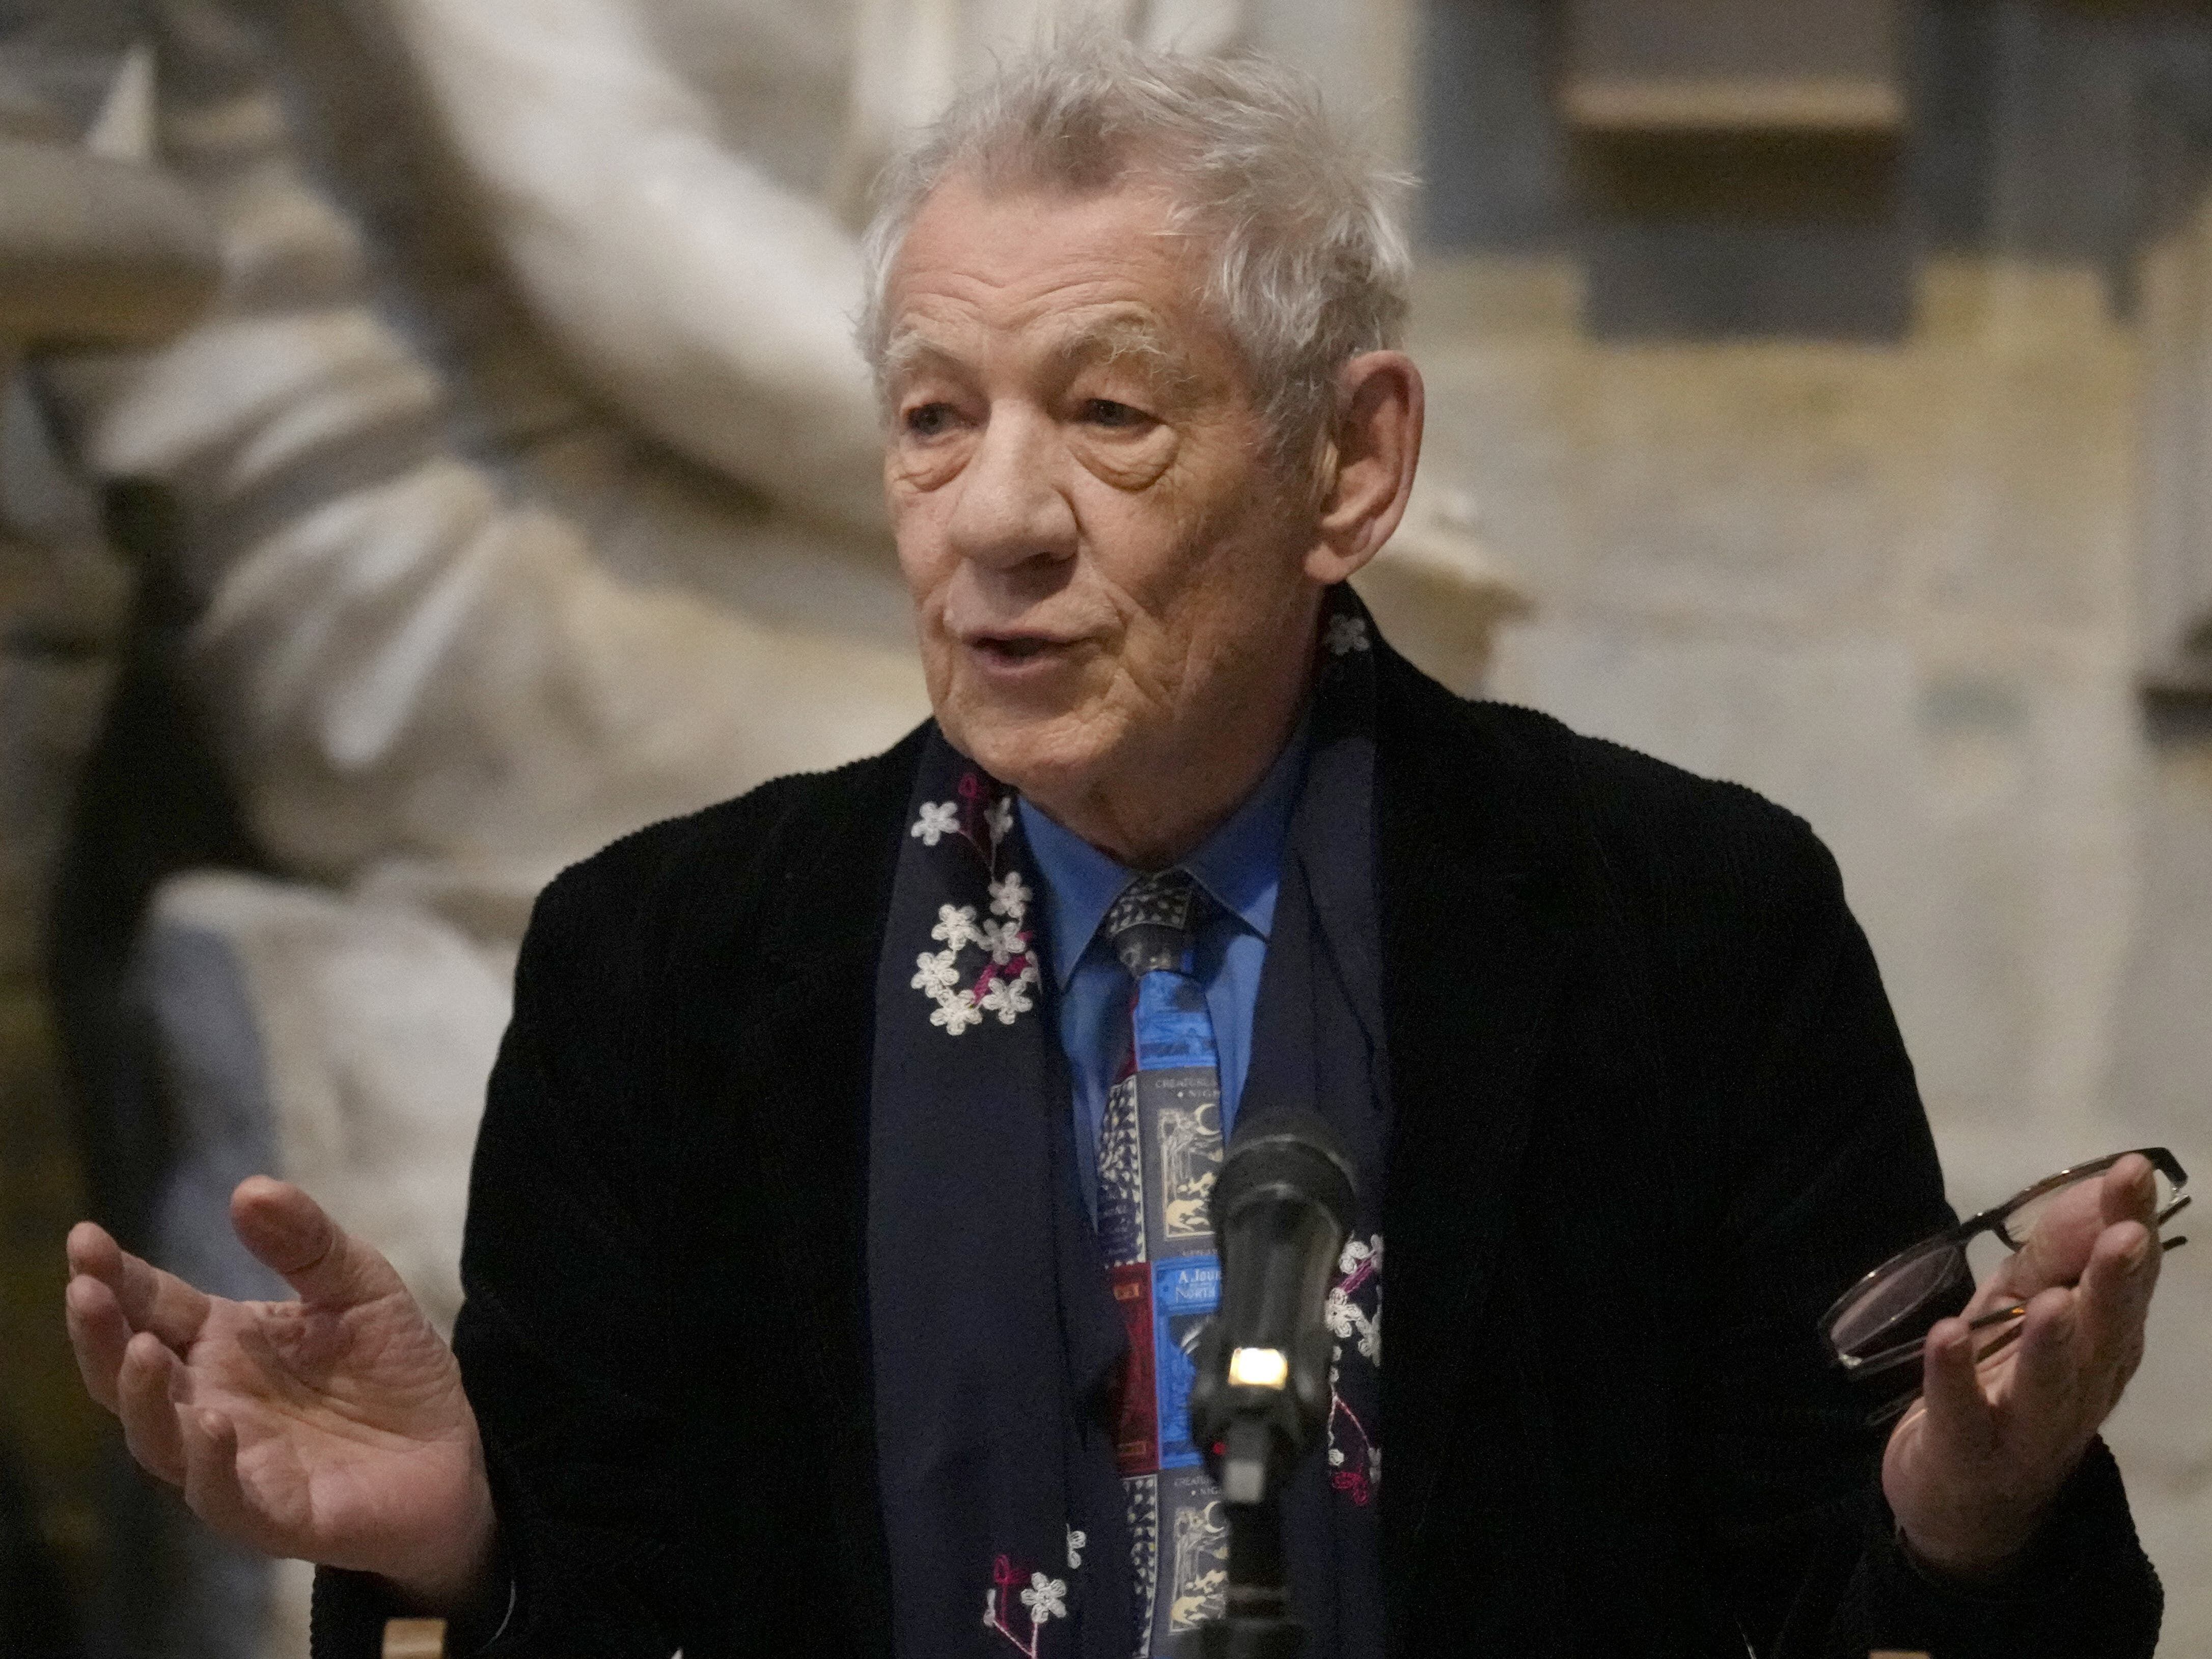 Wrist and neck injuries ‘on the mend’ after theatre fall, says Sir Ian McKellen